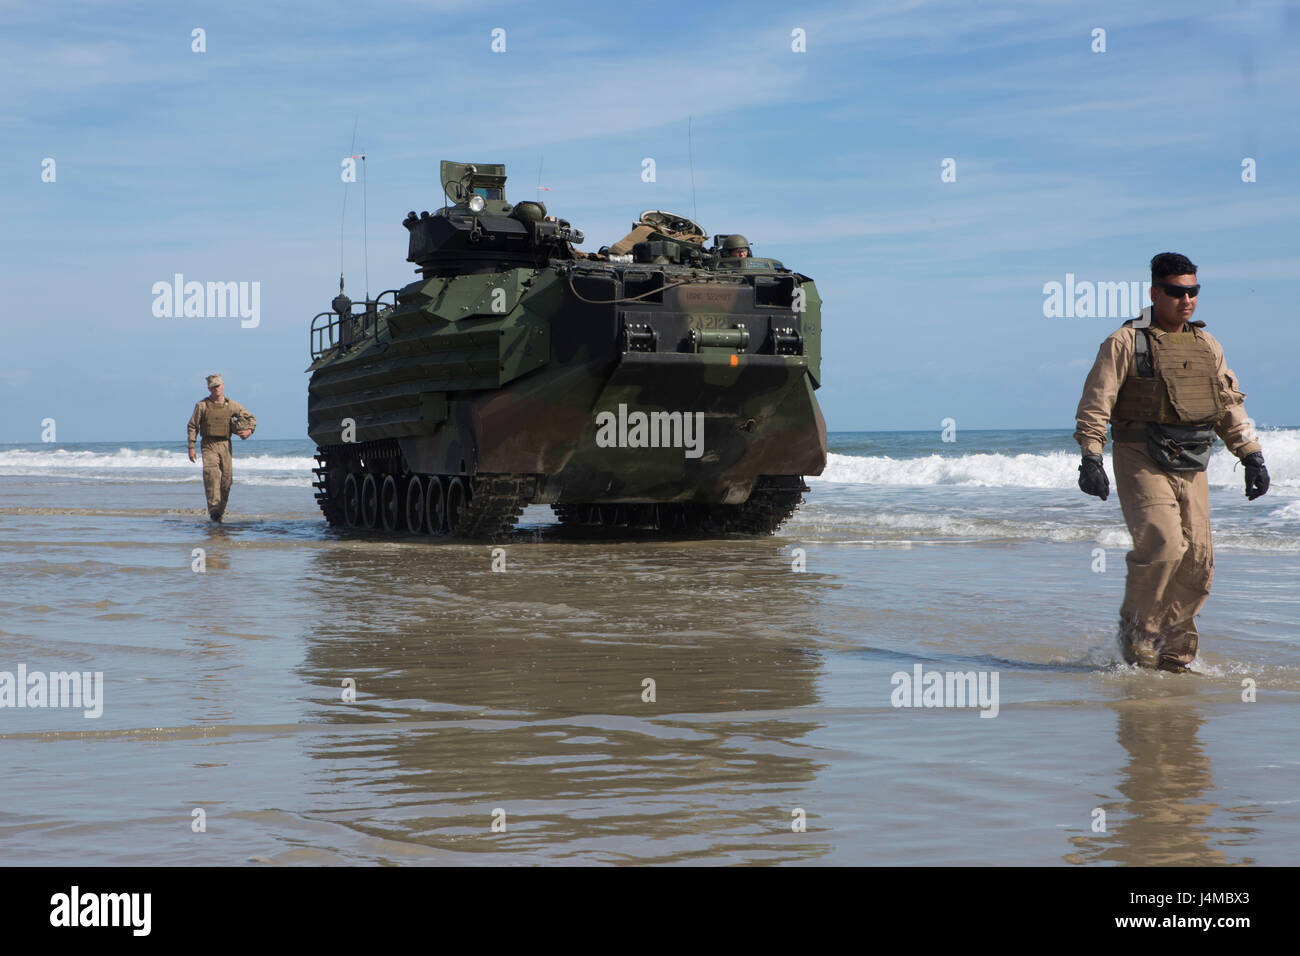 U.S. Marines with 2nd Platoon, Alpha Company, 2nd Assault Amphibian Battalion, 2nd Marine Division (2d MARDIV), ground-guide an AAV-P7/A1 assault amphibious vehicle at Onslow Beach, Camp Lejeune, N.C., Feb. 22, 2017. Marines conducted amphibious assaults to enhance and maintain proficiency on ship to shore movement. (U.S. Marine Corps photo by Lance Cpl. Alexis C. Schneider) Stock Photo